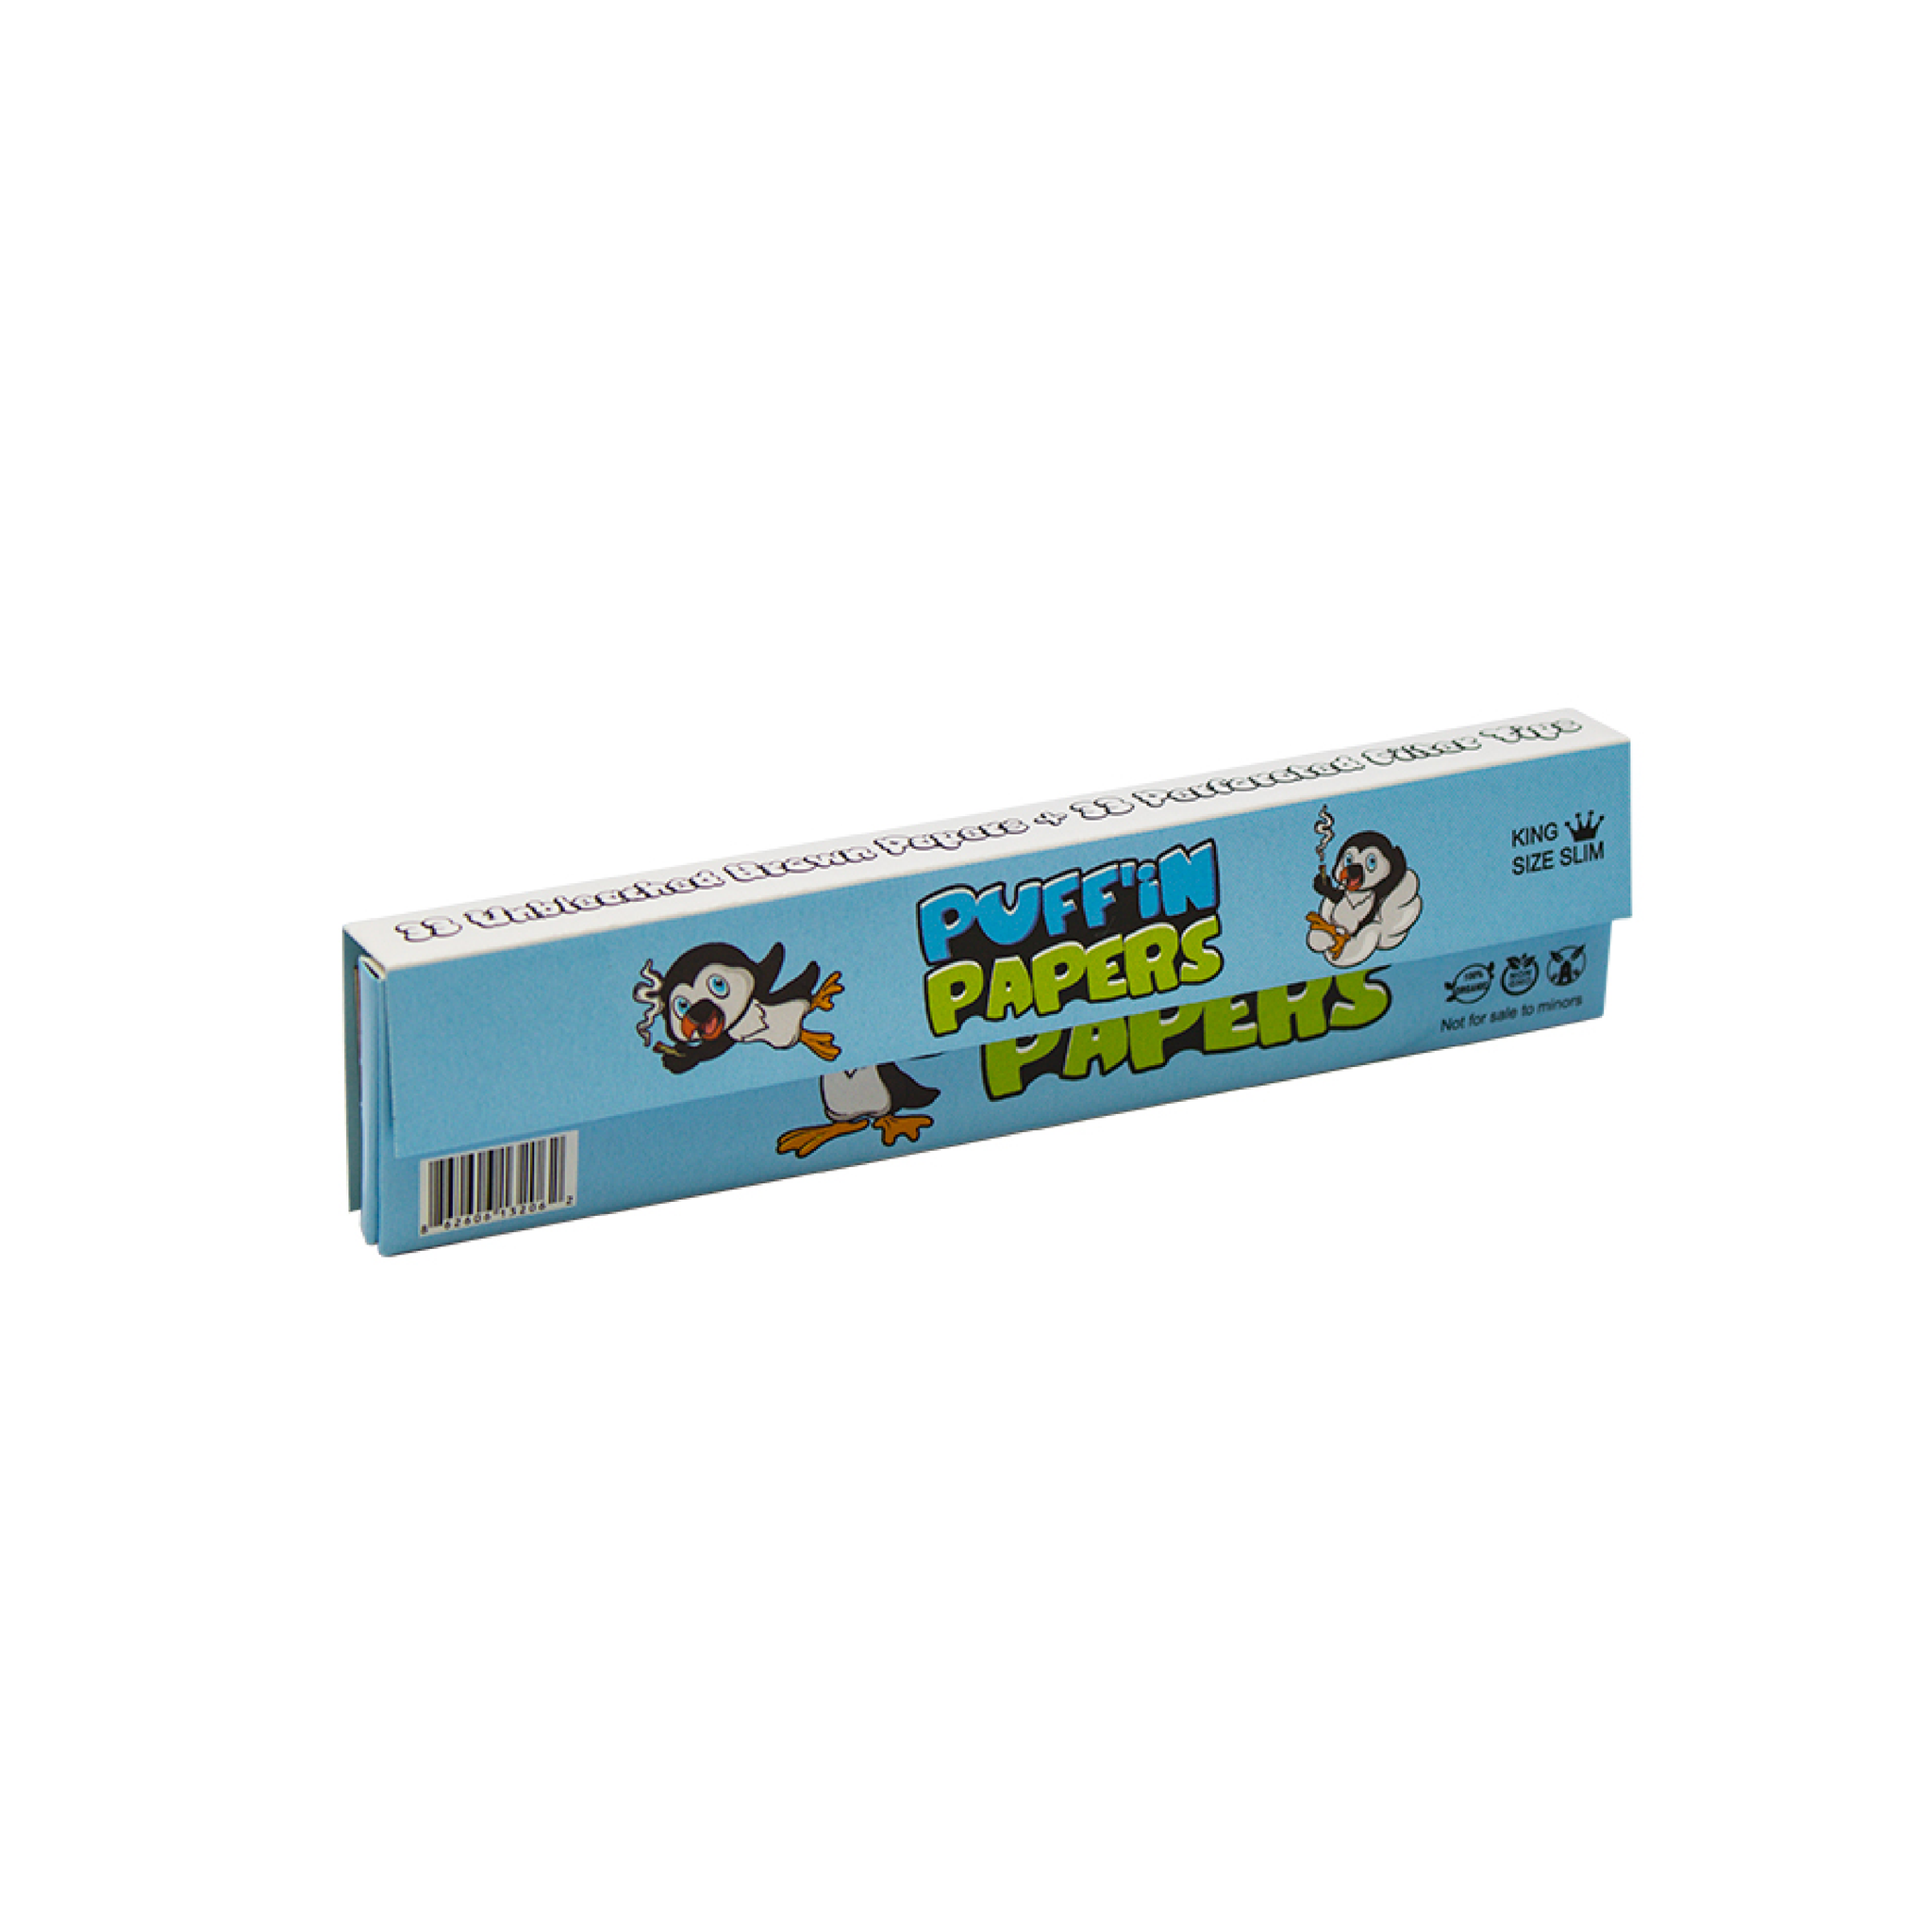 Unbleached King Size Slim Rolling Paper and Tips